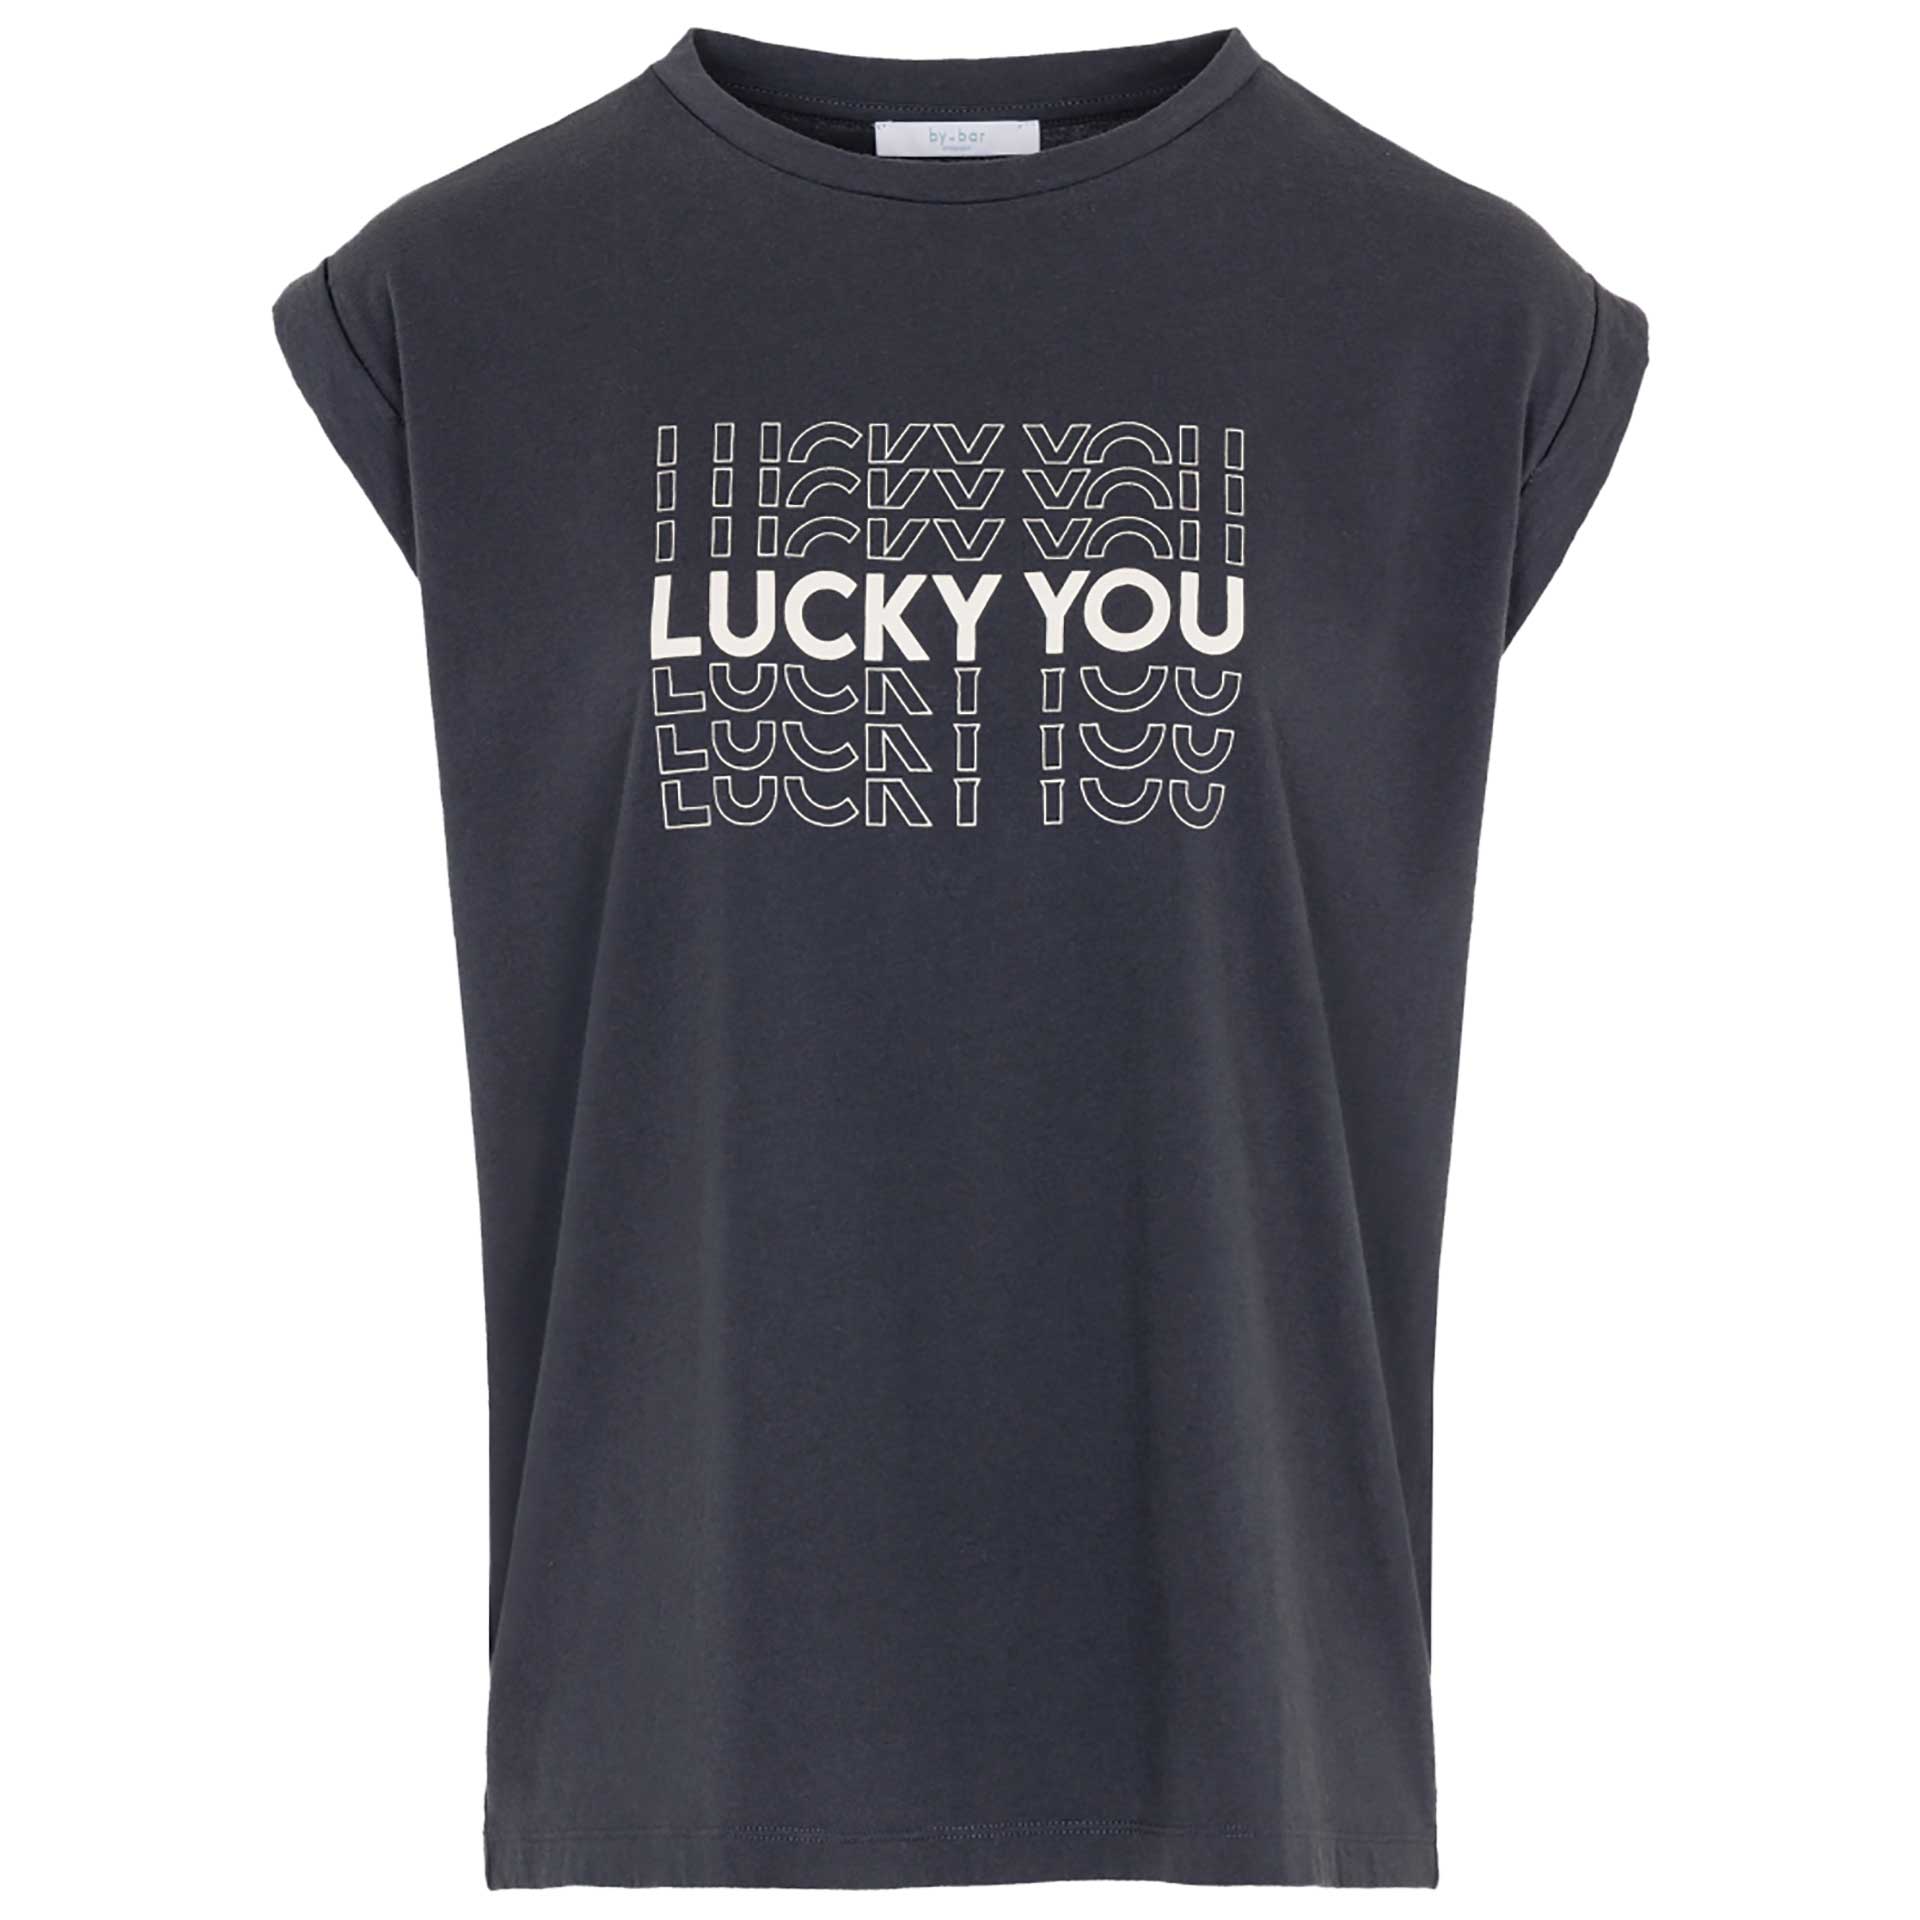 T-shirt Thelma lucky you